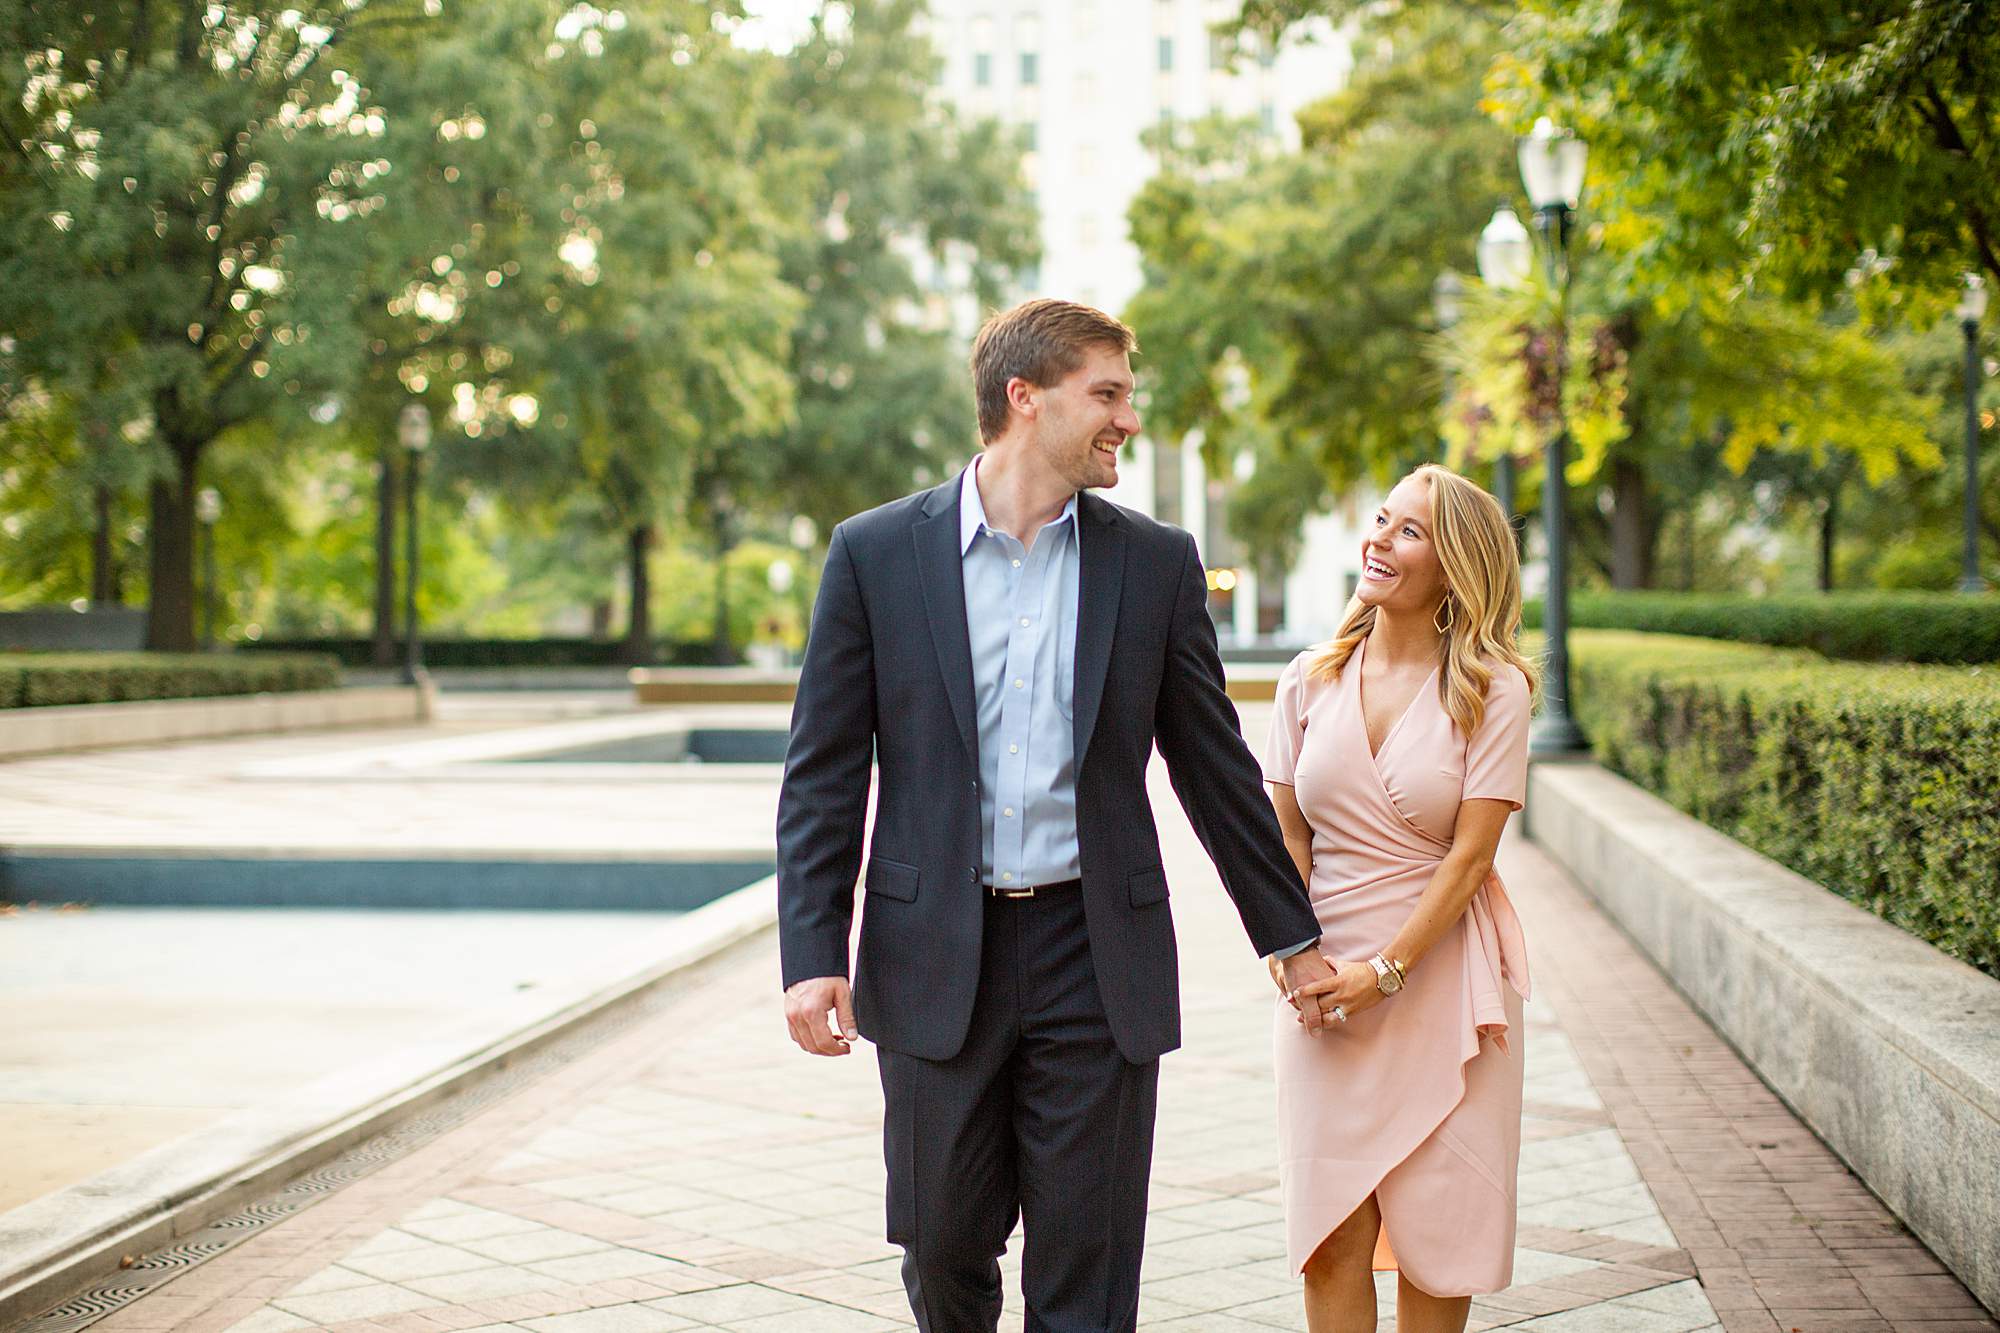 The sweetest spring anniversary session for a go-getter couple at the iconic Linn Park in downtown Birmingham by the courthouse.